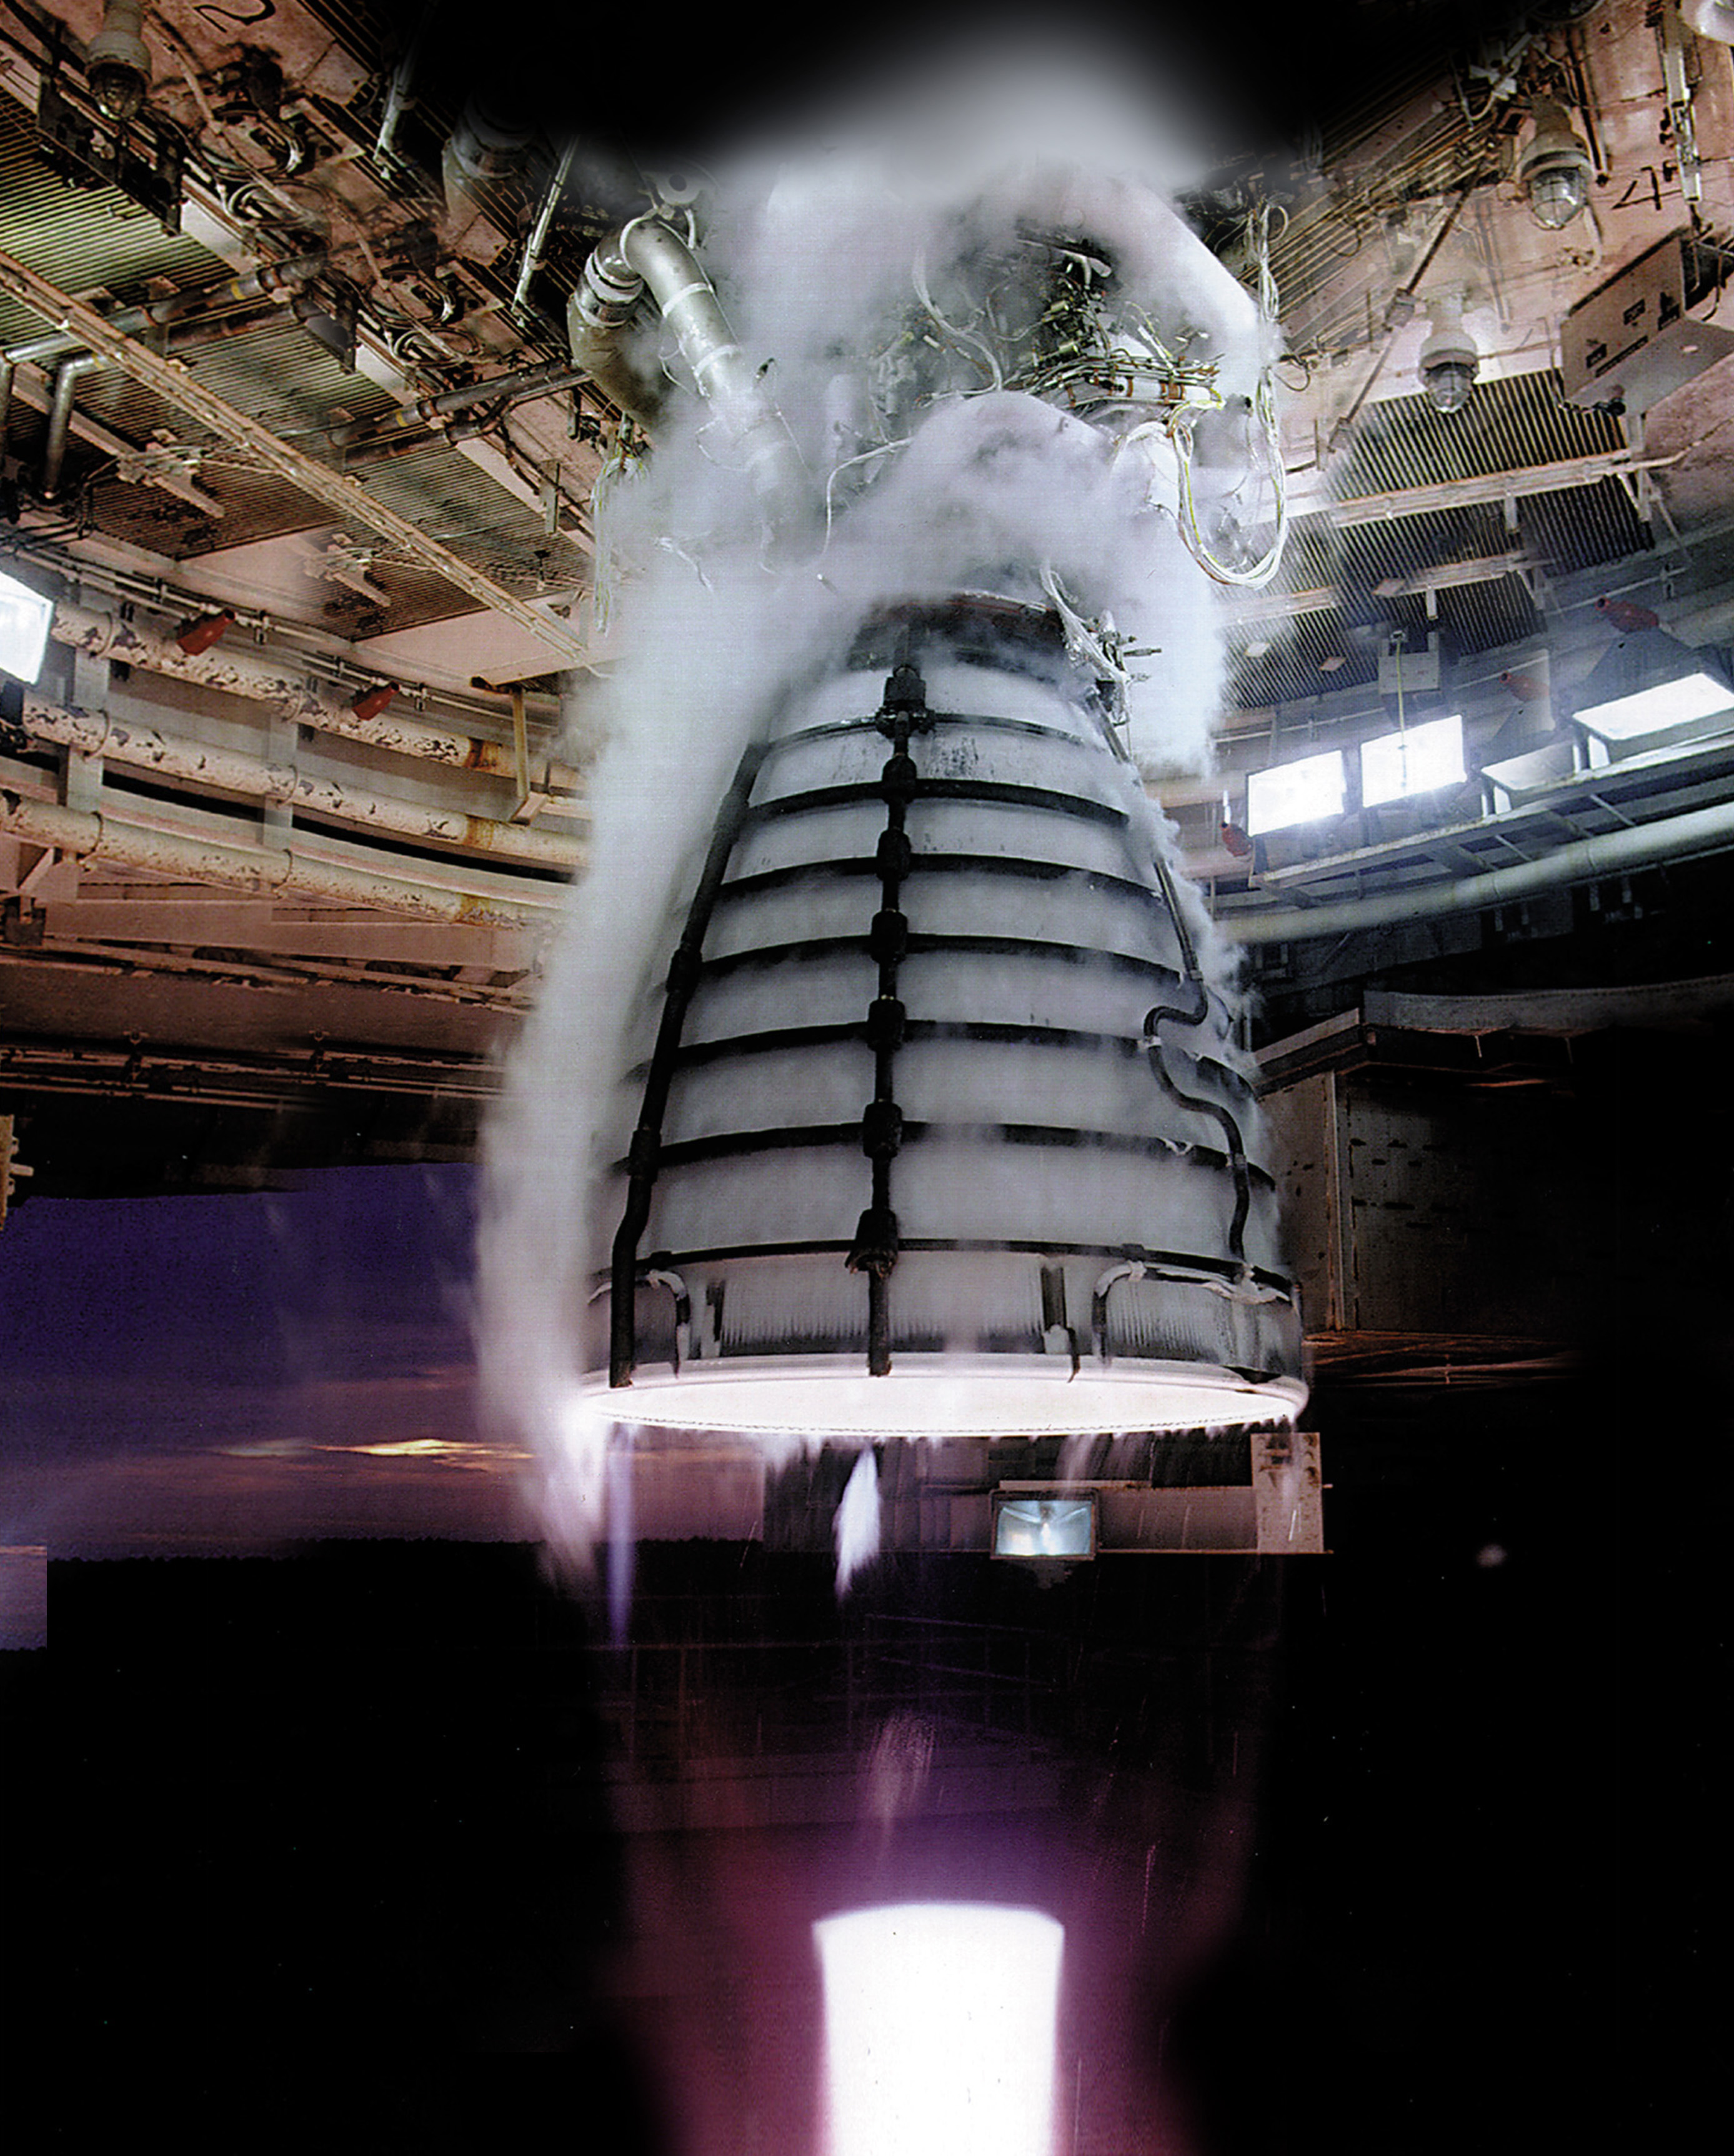 Learn more about SLS propulsion in today’s Tweet Chat with NASA